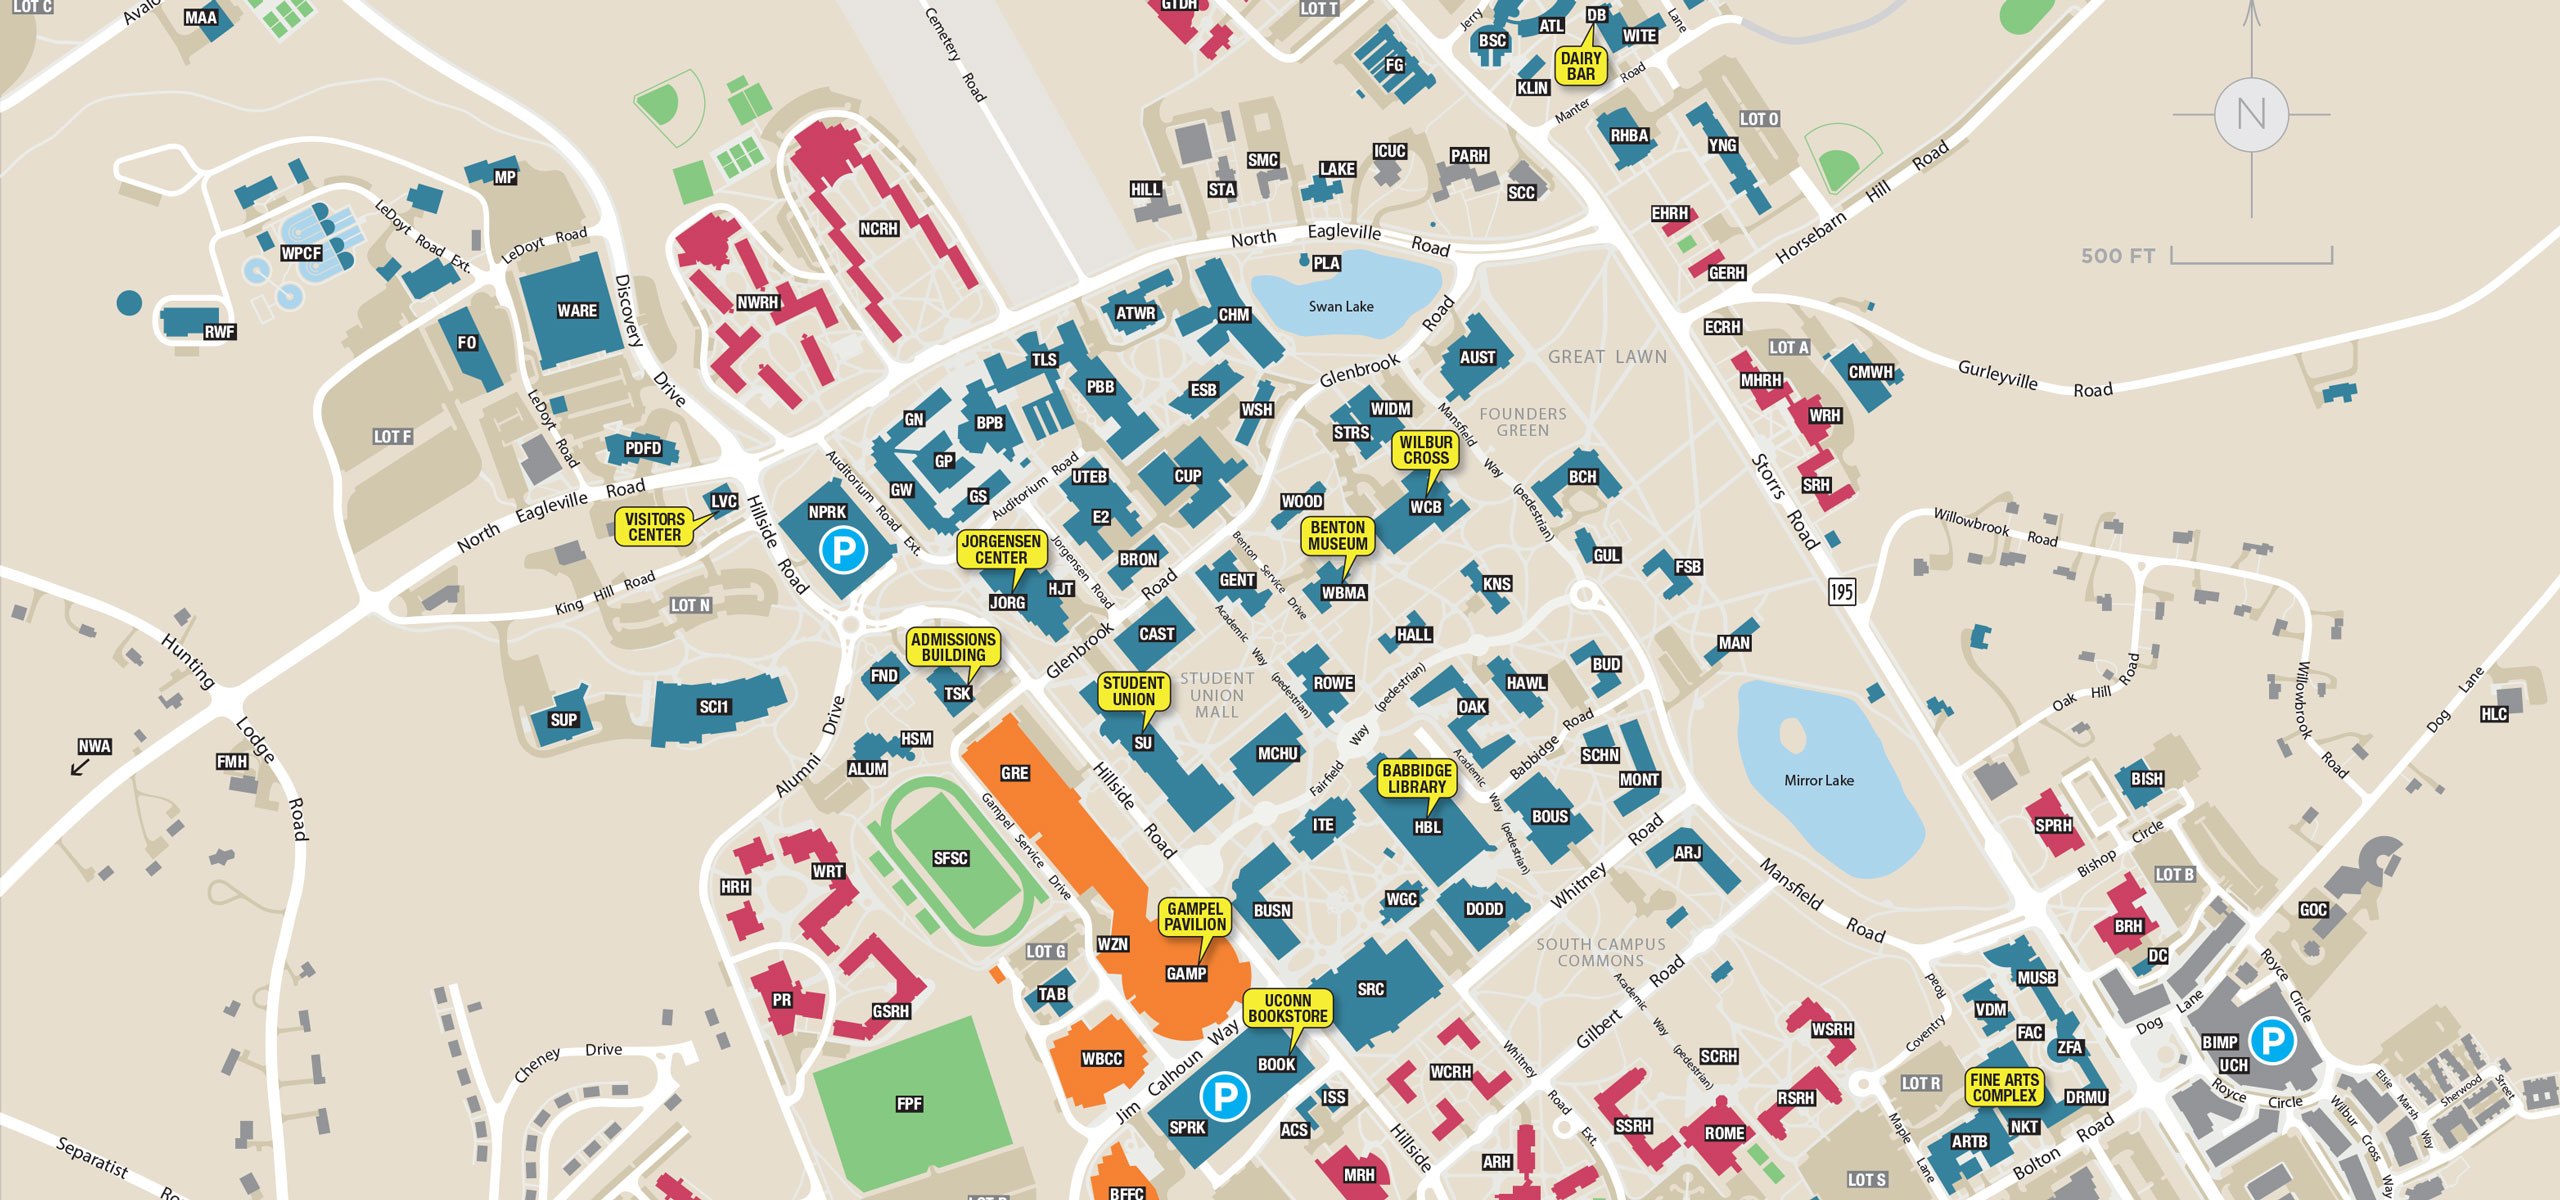 Map of UConn Storrs Campus. Parking garages are located at Hillside Road (North Garage) and Jim Calhoun Way (South Garage) and are marked with the blue circle P.